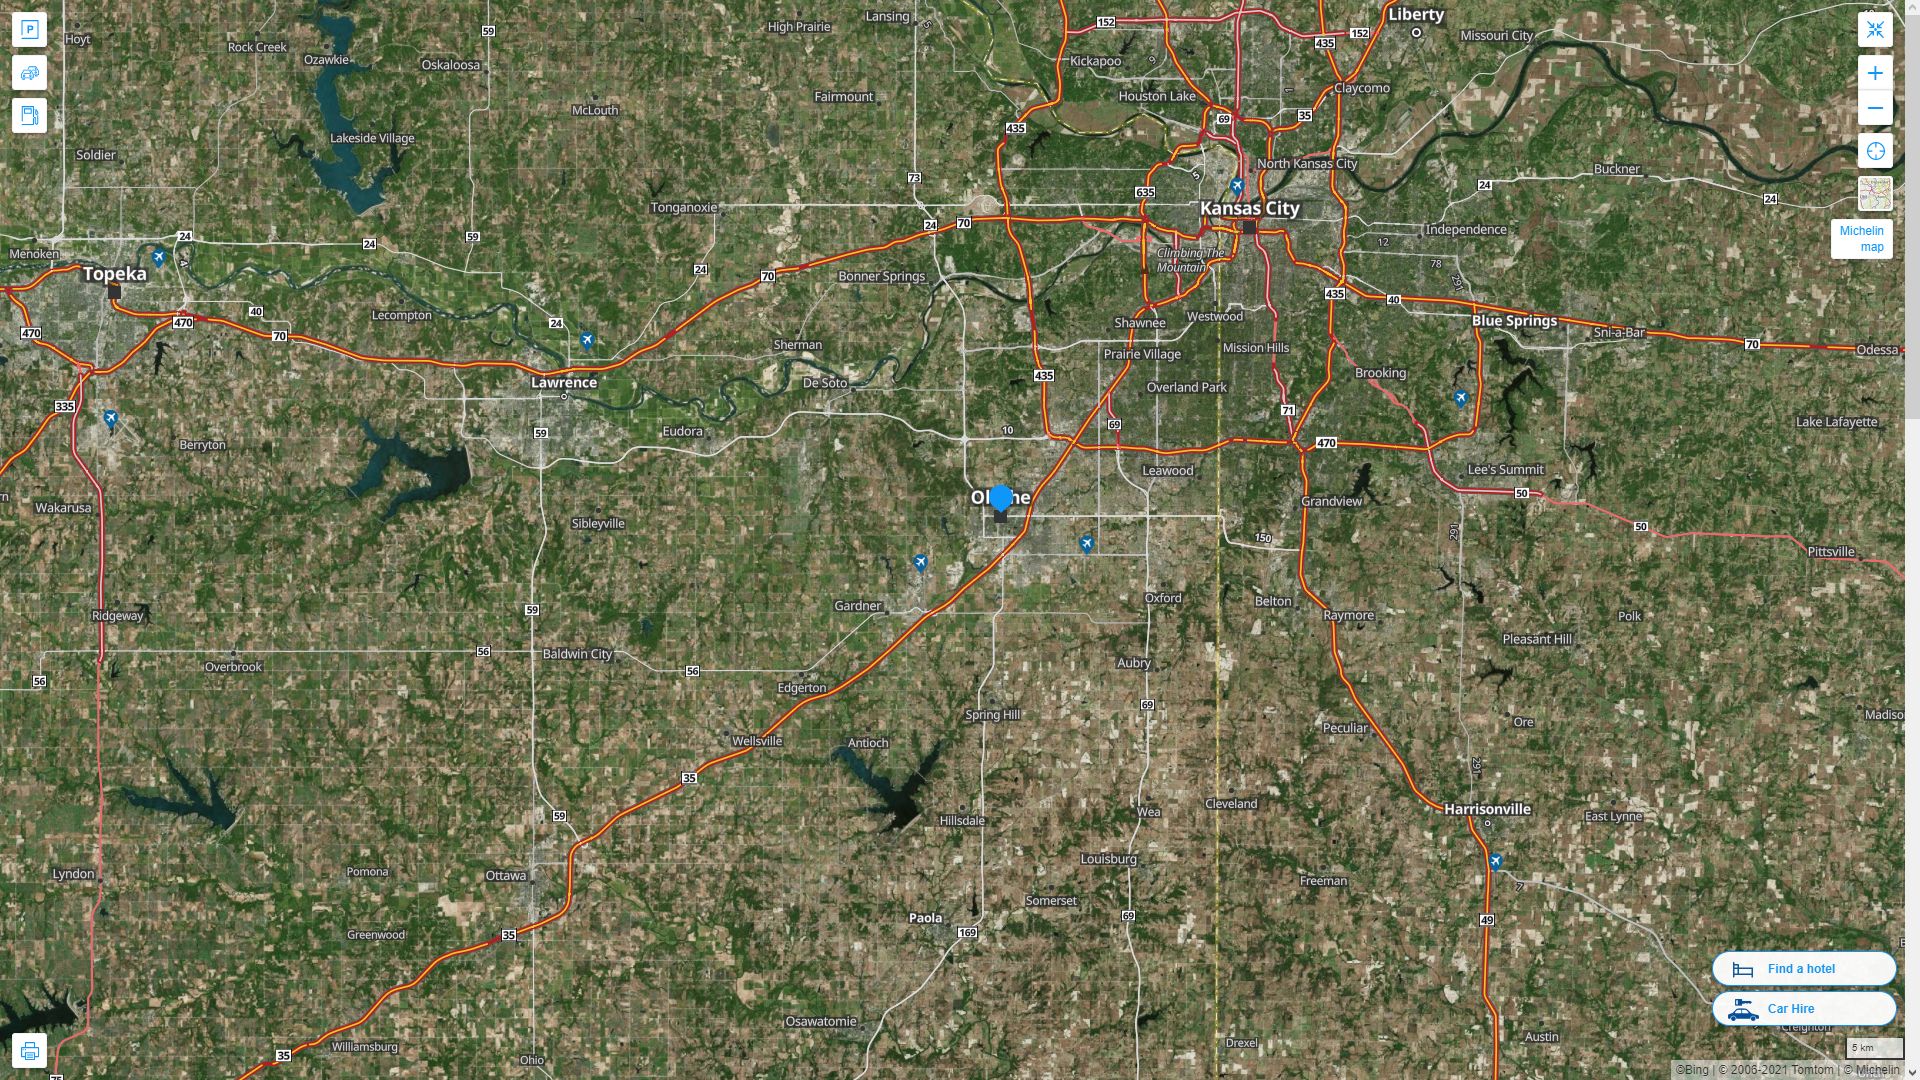 Olathe Kansas Highway and Road Map with Satellite View